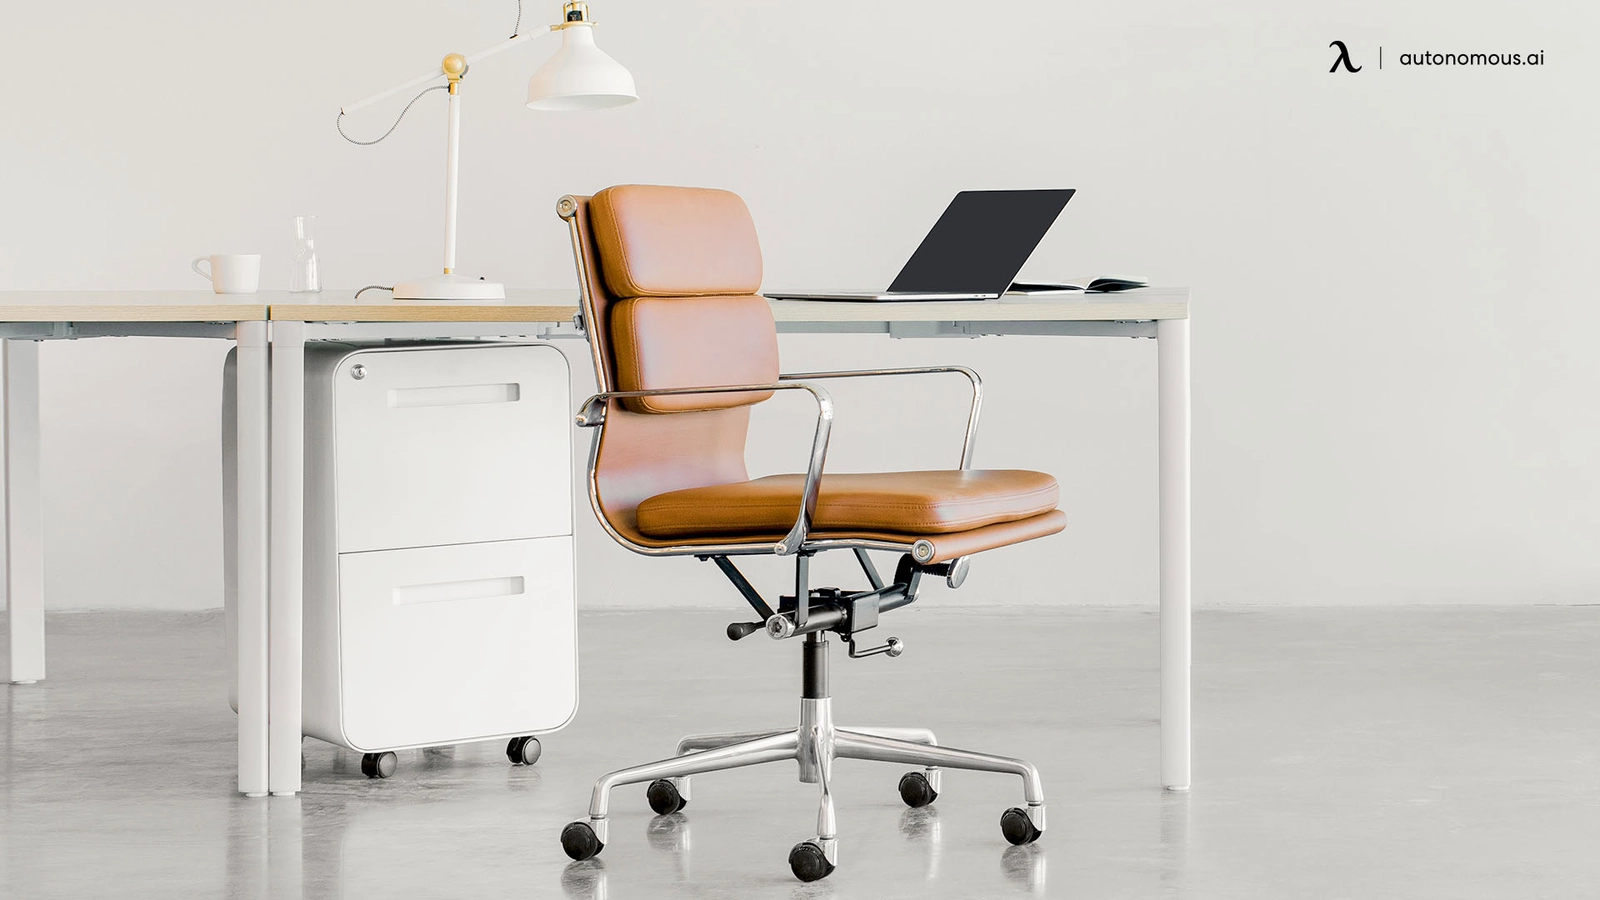 15 Best Modern Office Chair In Canada Of 2021